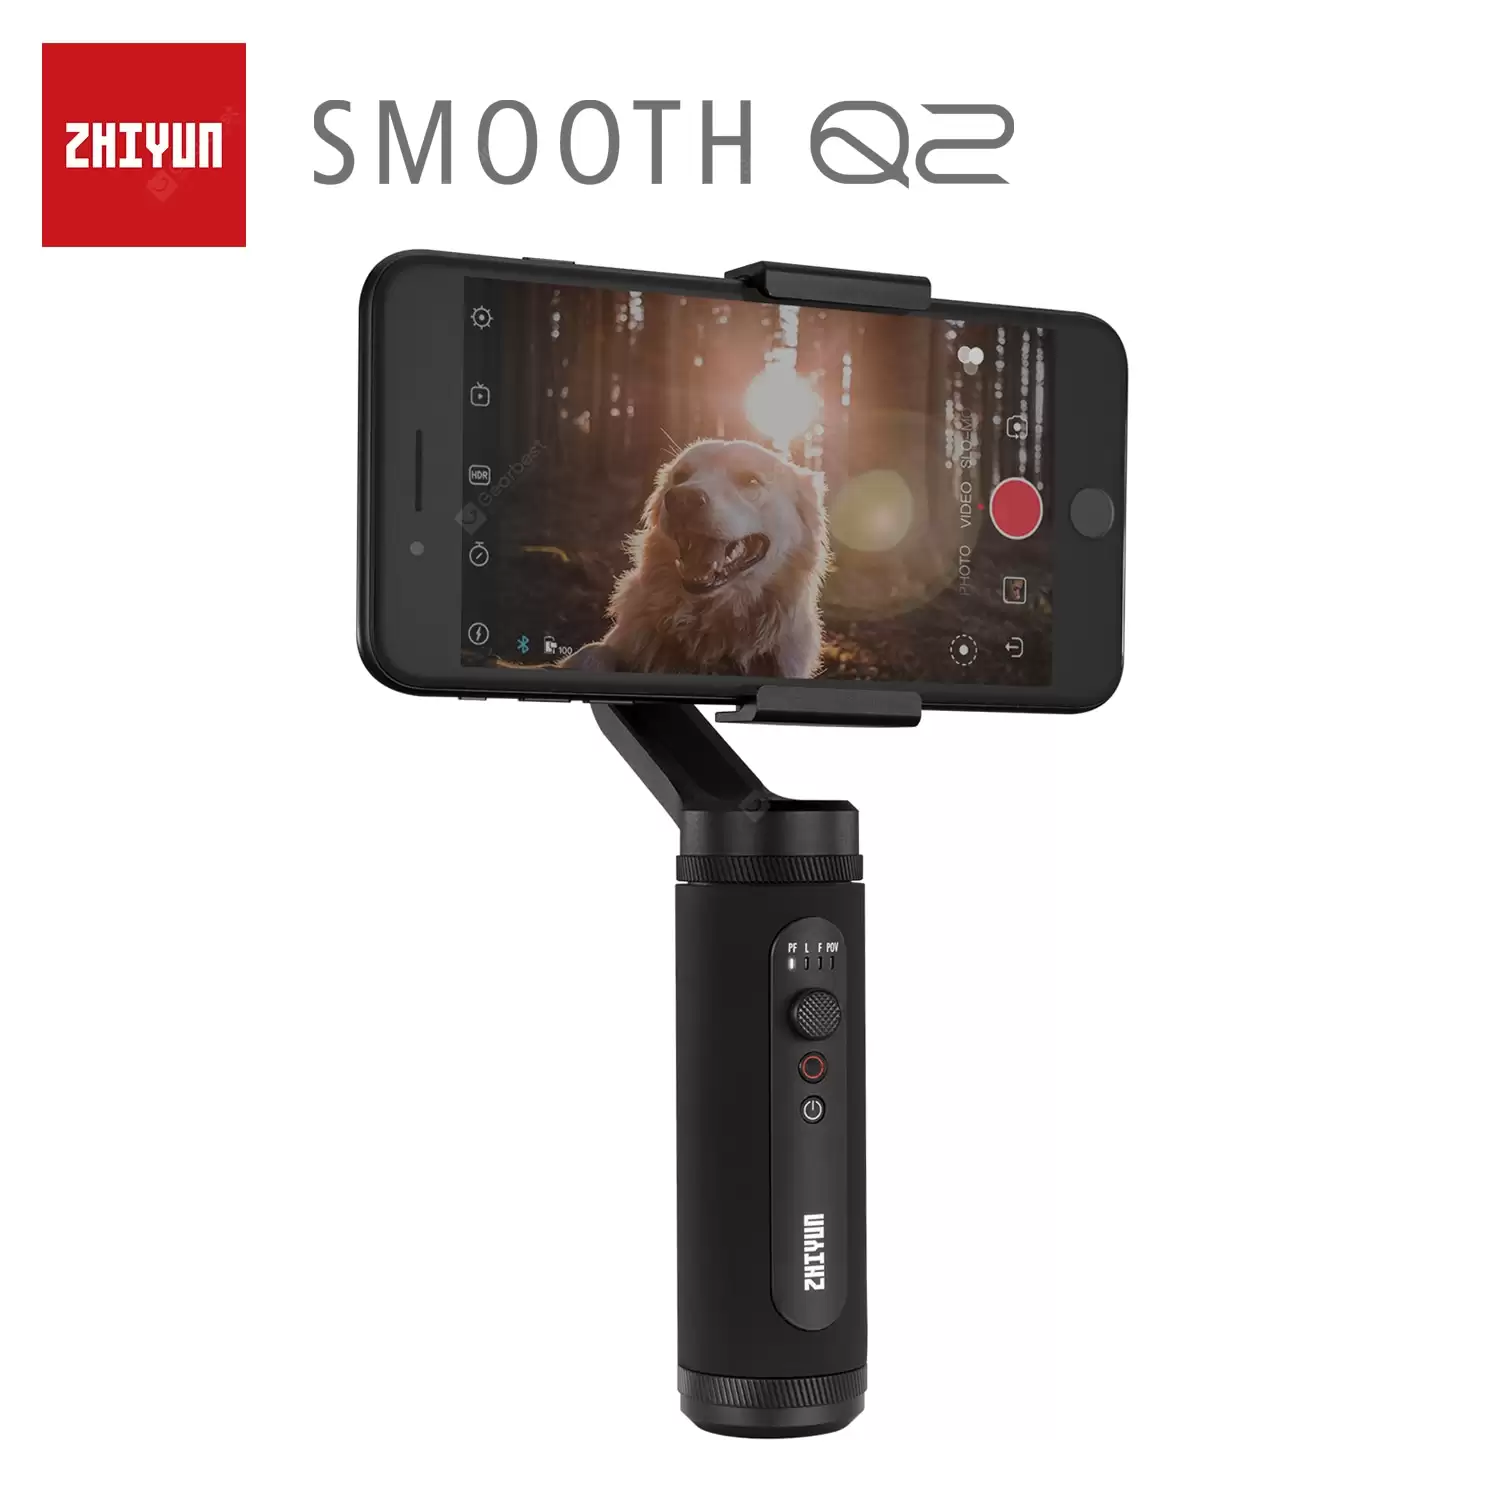 Order In Just $98.00 Zhiyun Official Smooth Q2 Pocket Size Gimbal For Smartphone Iphone Samsung Nvlog Handheld Stabilizer At Gearbest With This Coupon